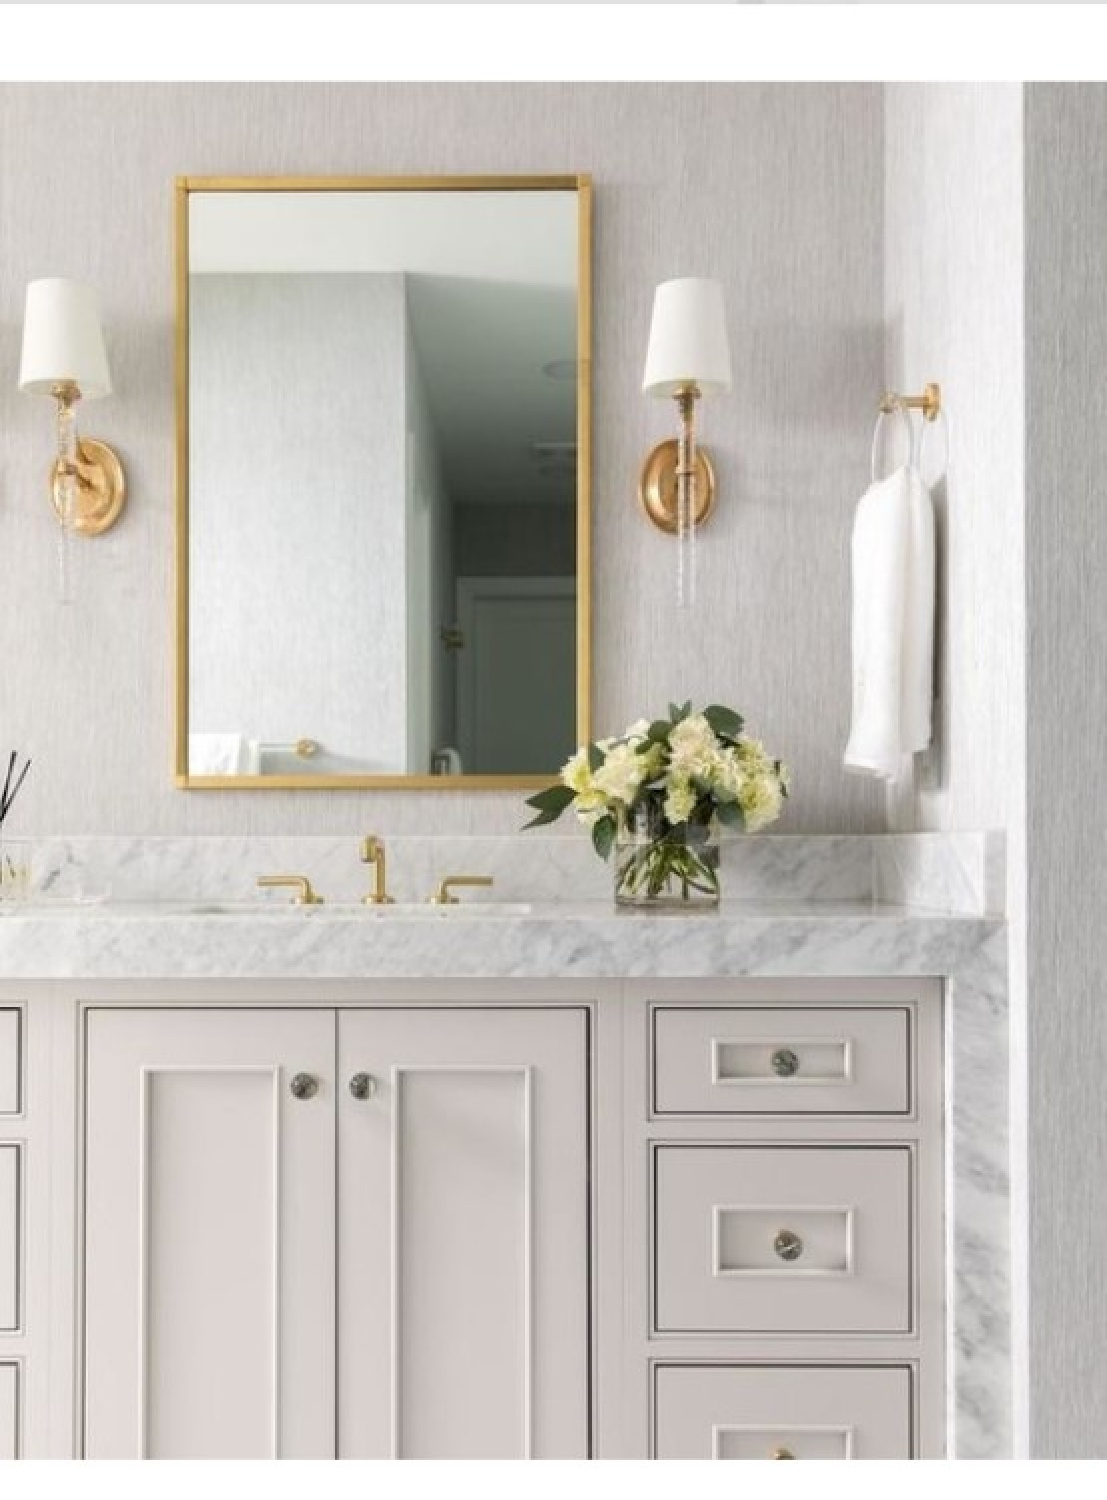 Abigail sconces (Marie Flanigan for Visual Comfort) in a lovely sophisticated traditional bathroom.